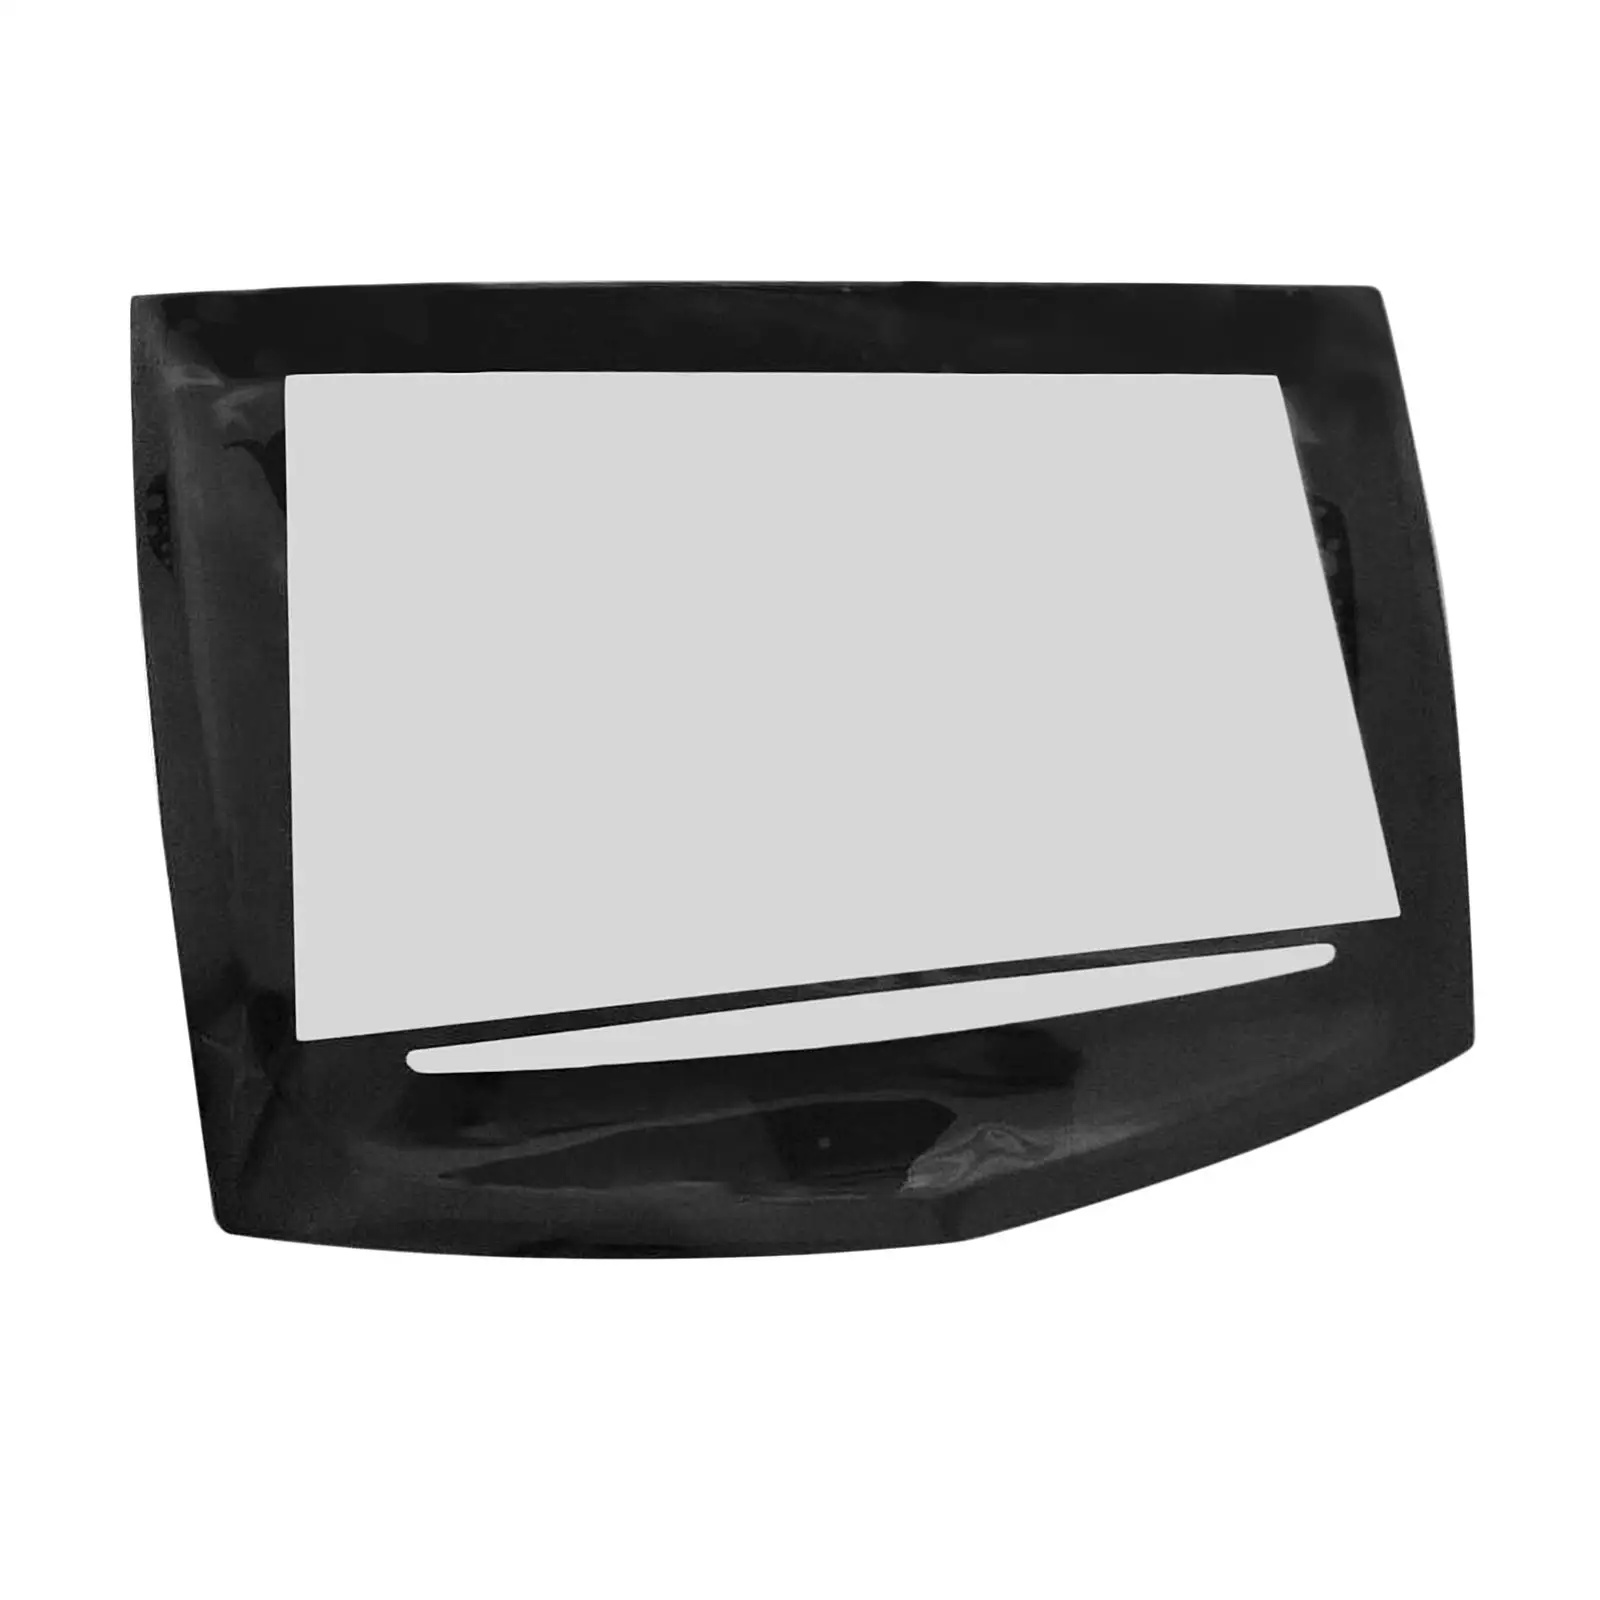 Touch Screen Display Glass Assembly Screen Digitizer Fit for Cadillac Escalade 18-21 84232093 Automobile Parts Auto Parts